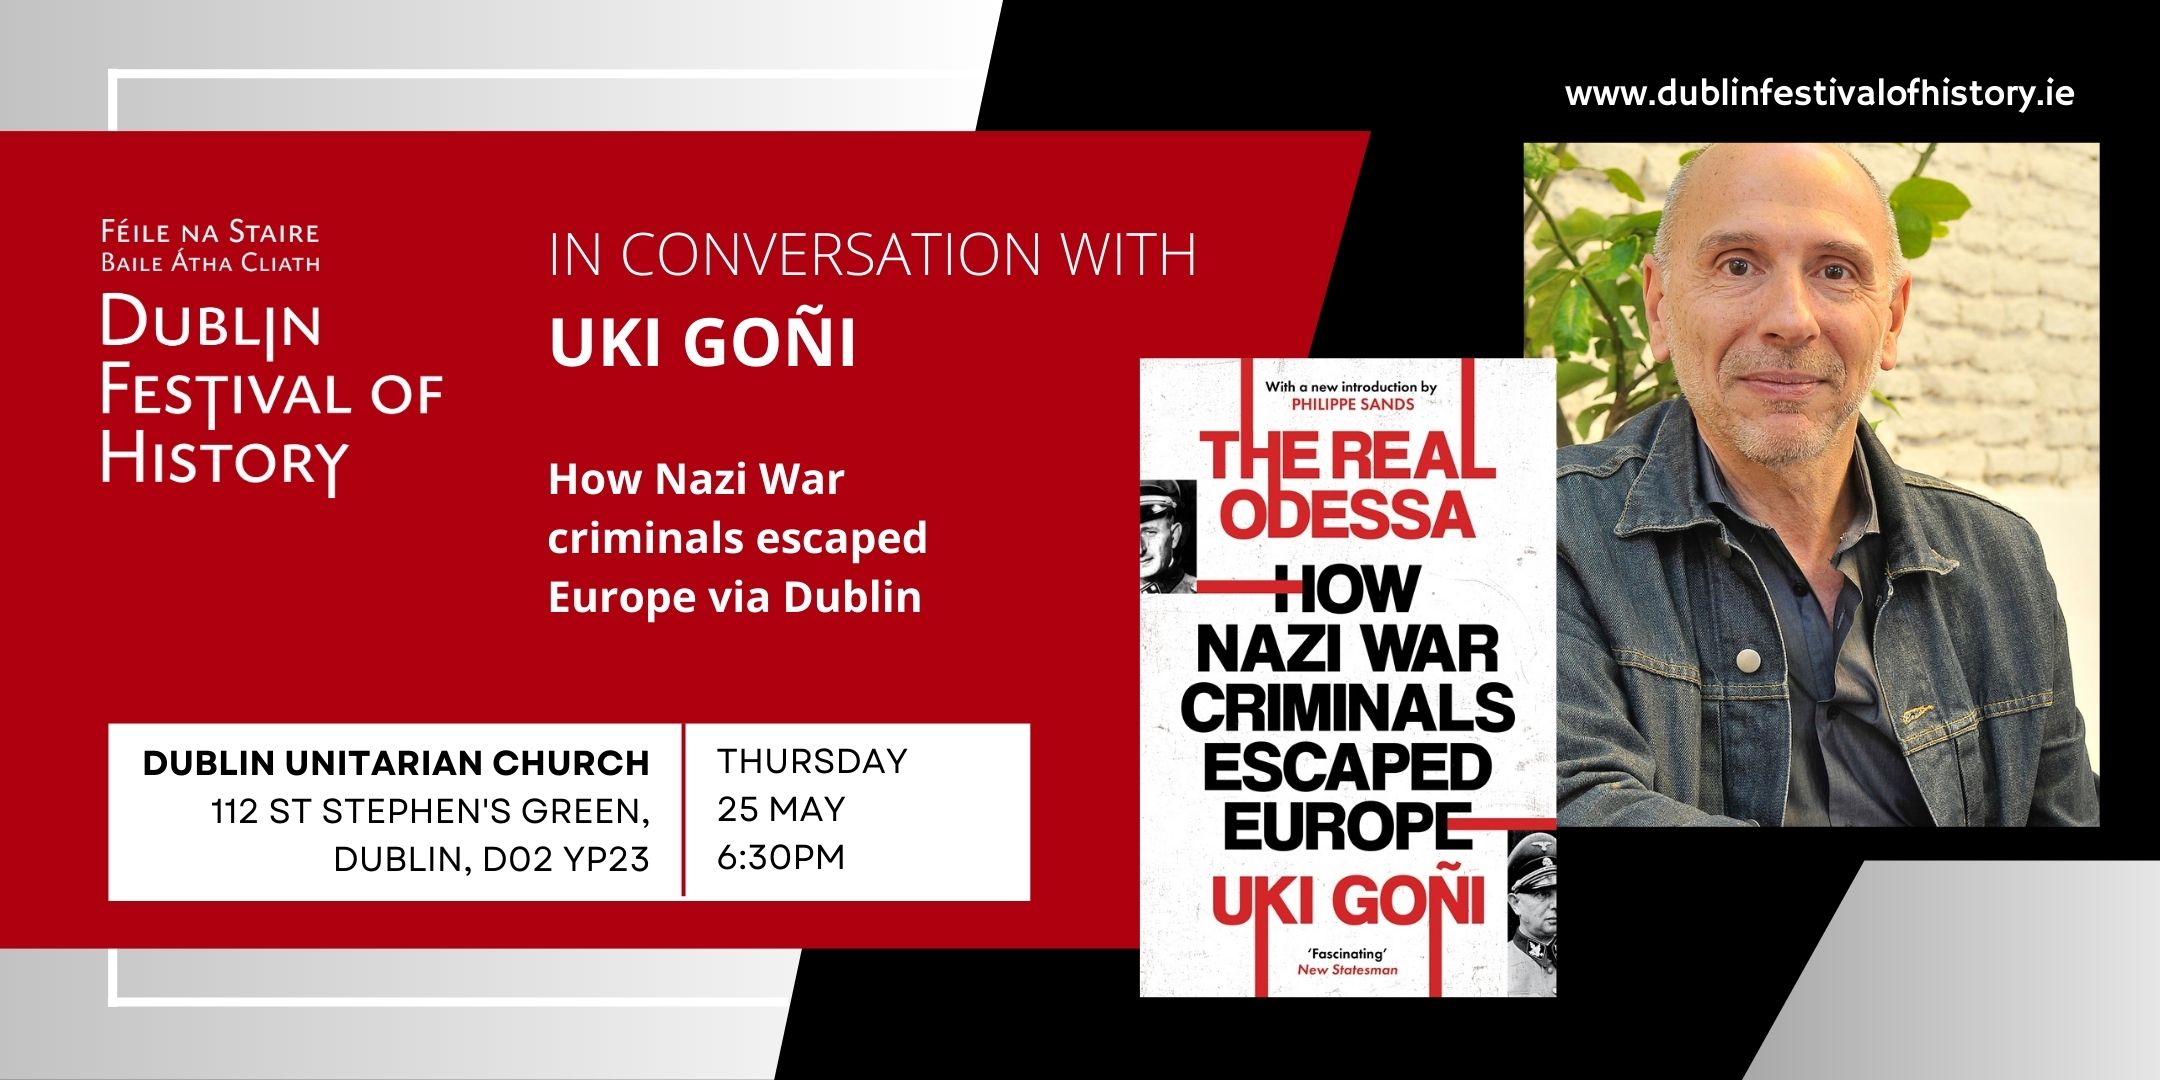 Image shows a photo of Uki Goni and the book cover for The Real Odessa: How Nazi War Criminals Escaped Europe, and providing event information.